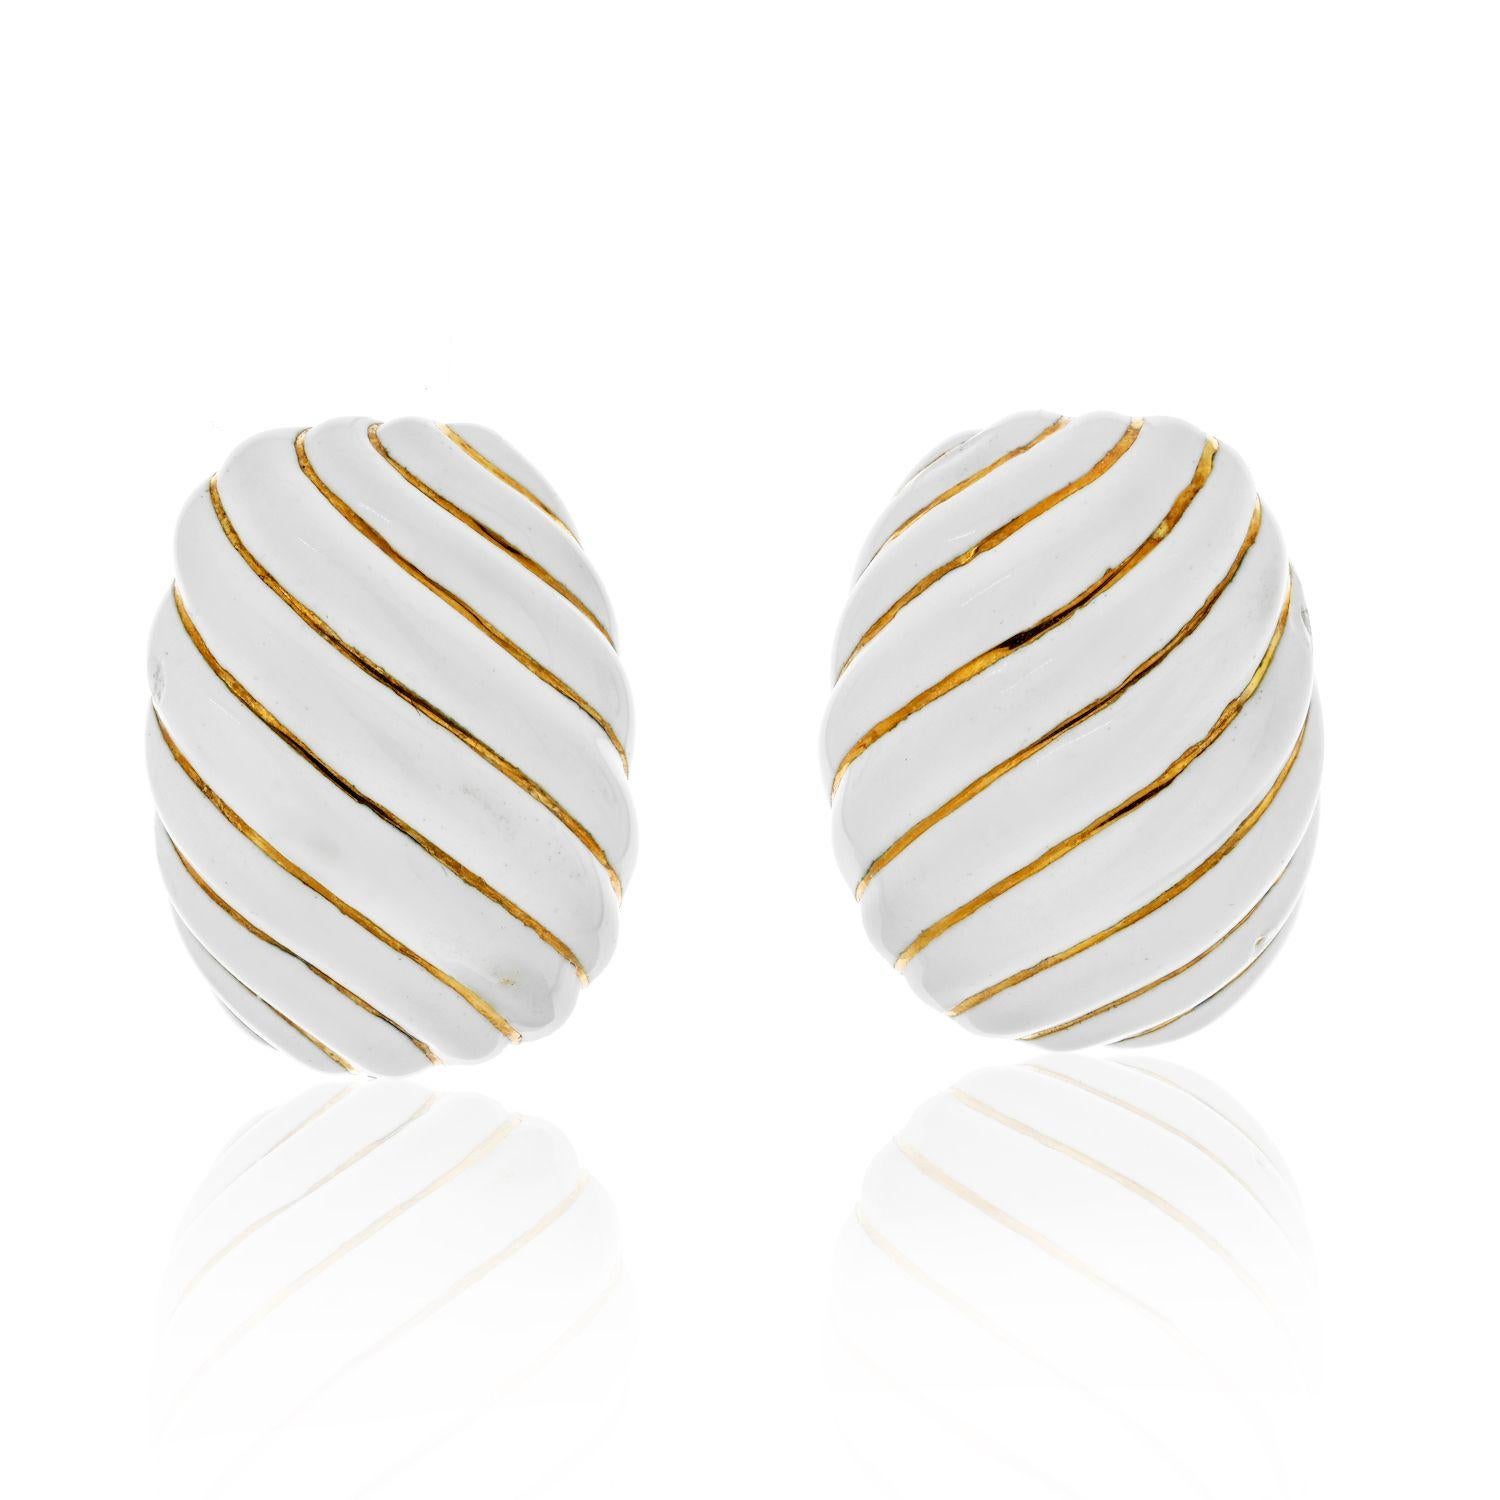 David Webb Platinum & 18K Yellow Gold White Enamel Gold Earrings In Excellent Condition For Sale In New York, NY